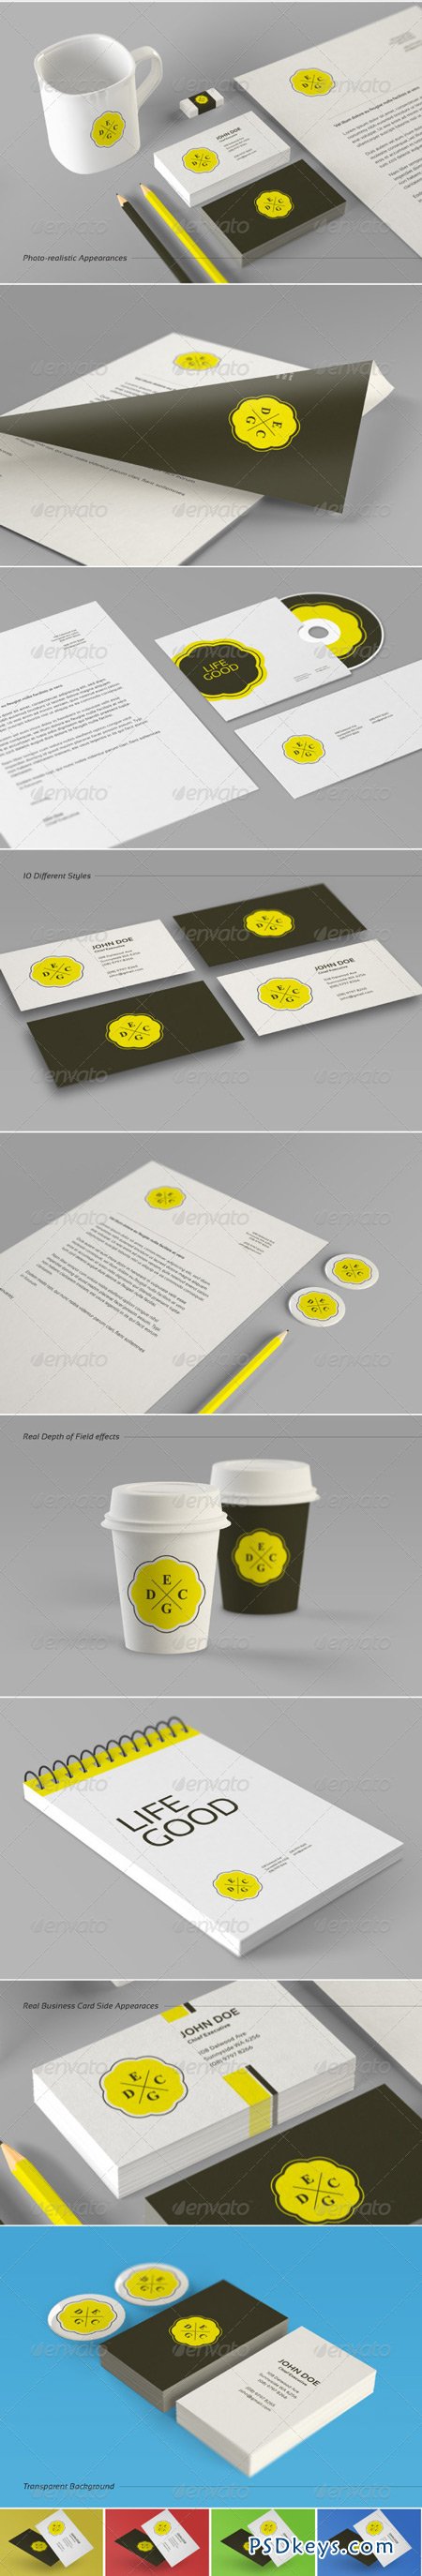 Close Up Corporate Identity and Branding Mock-Ups 5070026